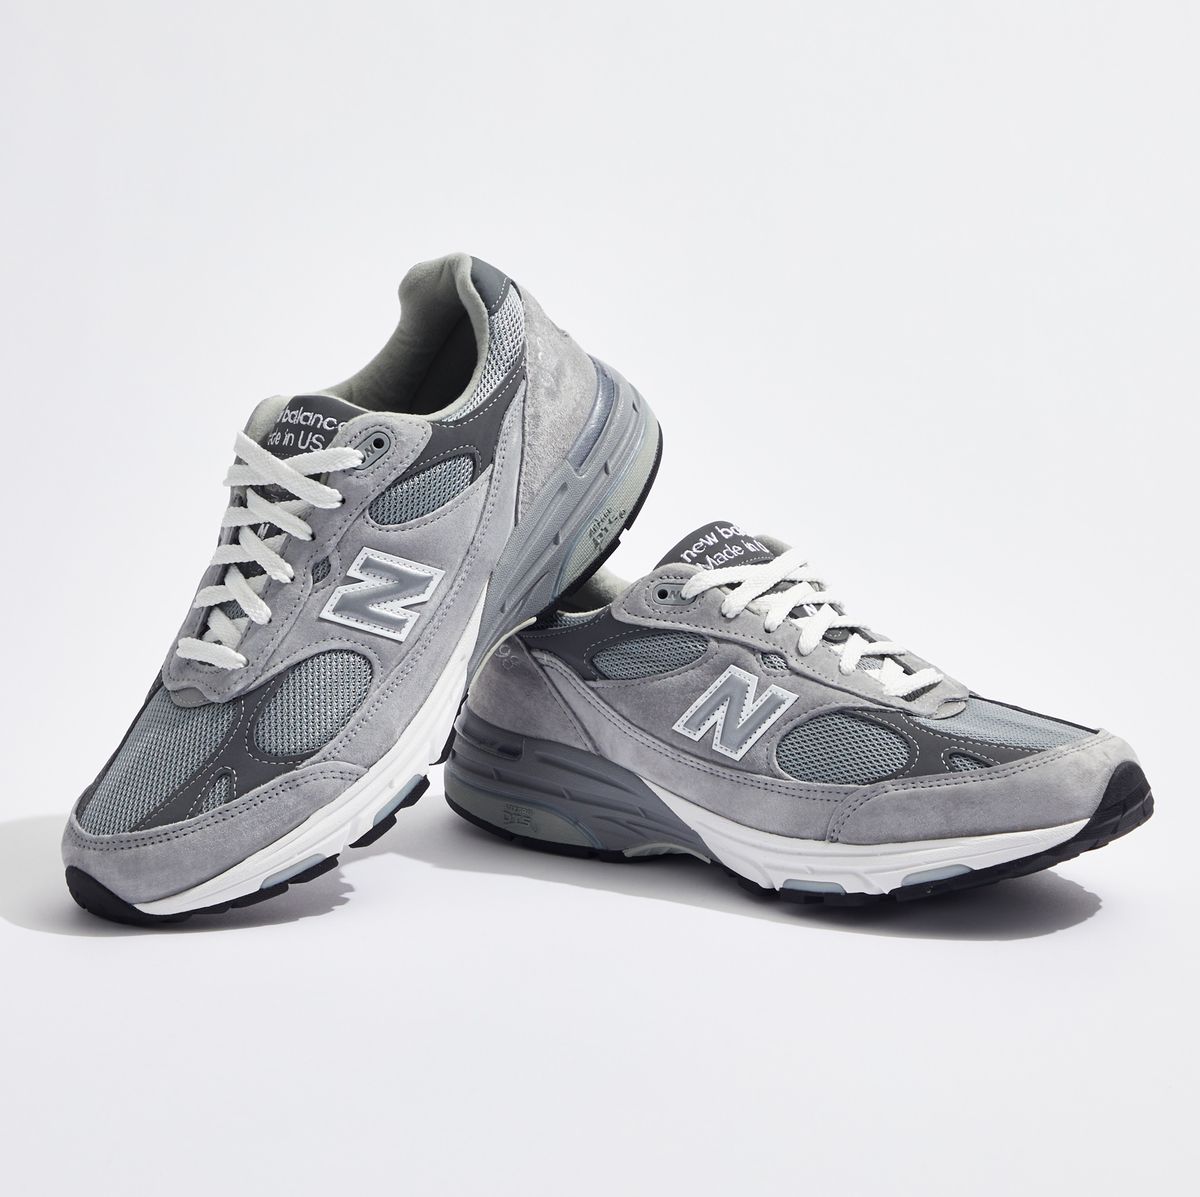 Aja sink Sincerely New Balance 993 Made in US Sneaker Review, Price and Where to Buy